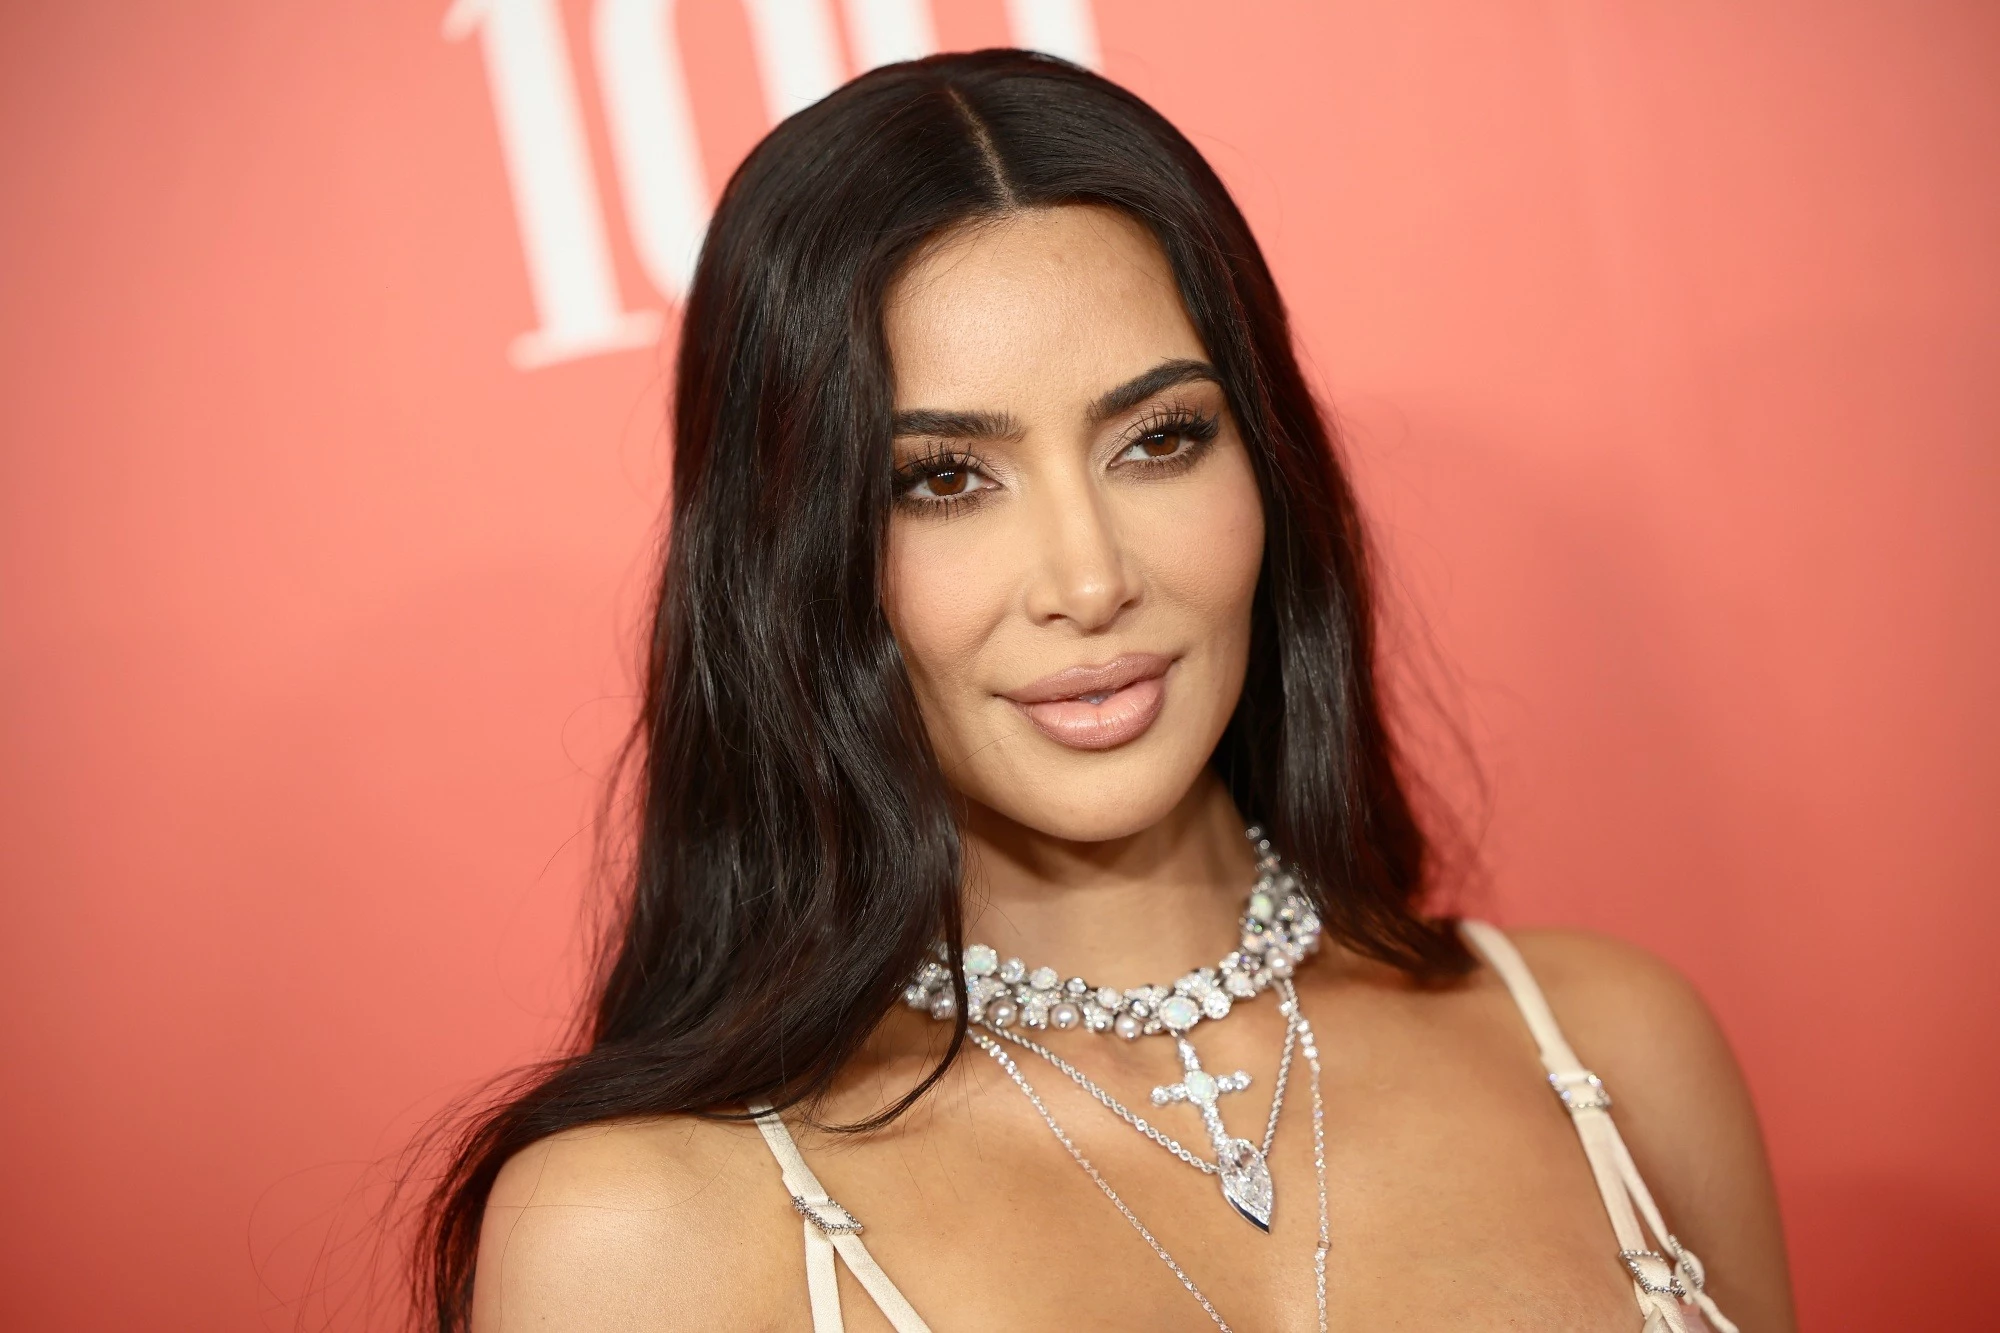 Kim Kardashian's Optimism And Patient Approach To Love